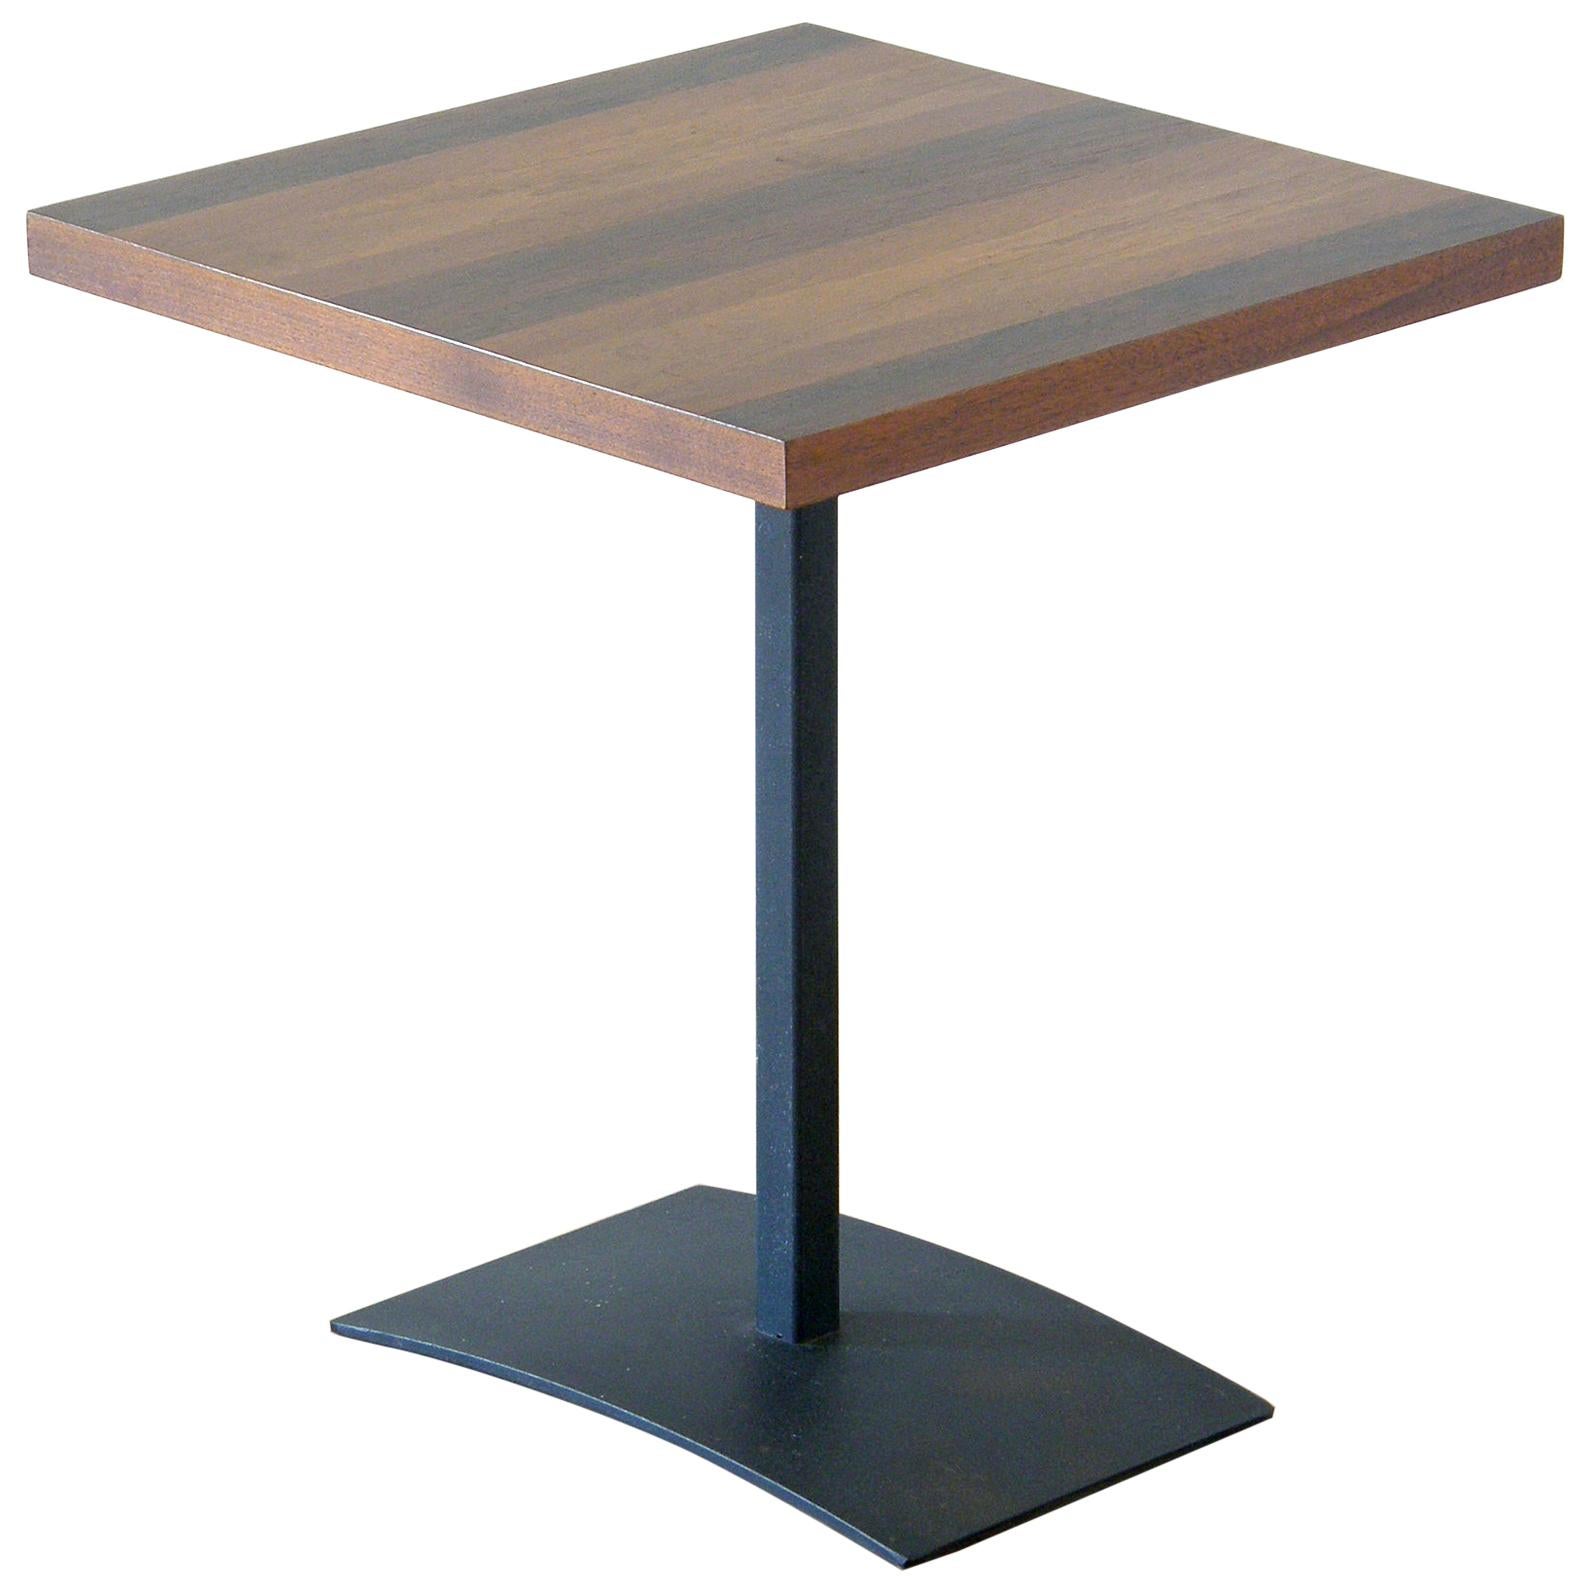 Milo Baughman Side Table for Directional with Arched Base and Ombré Veneer Top